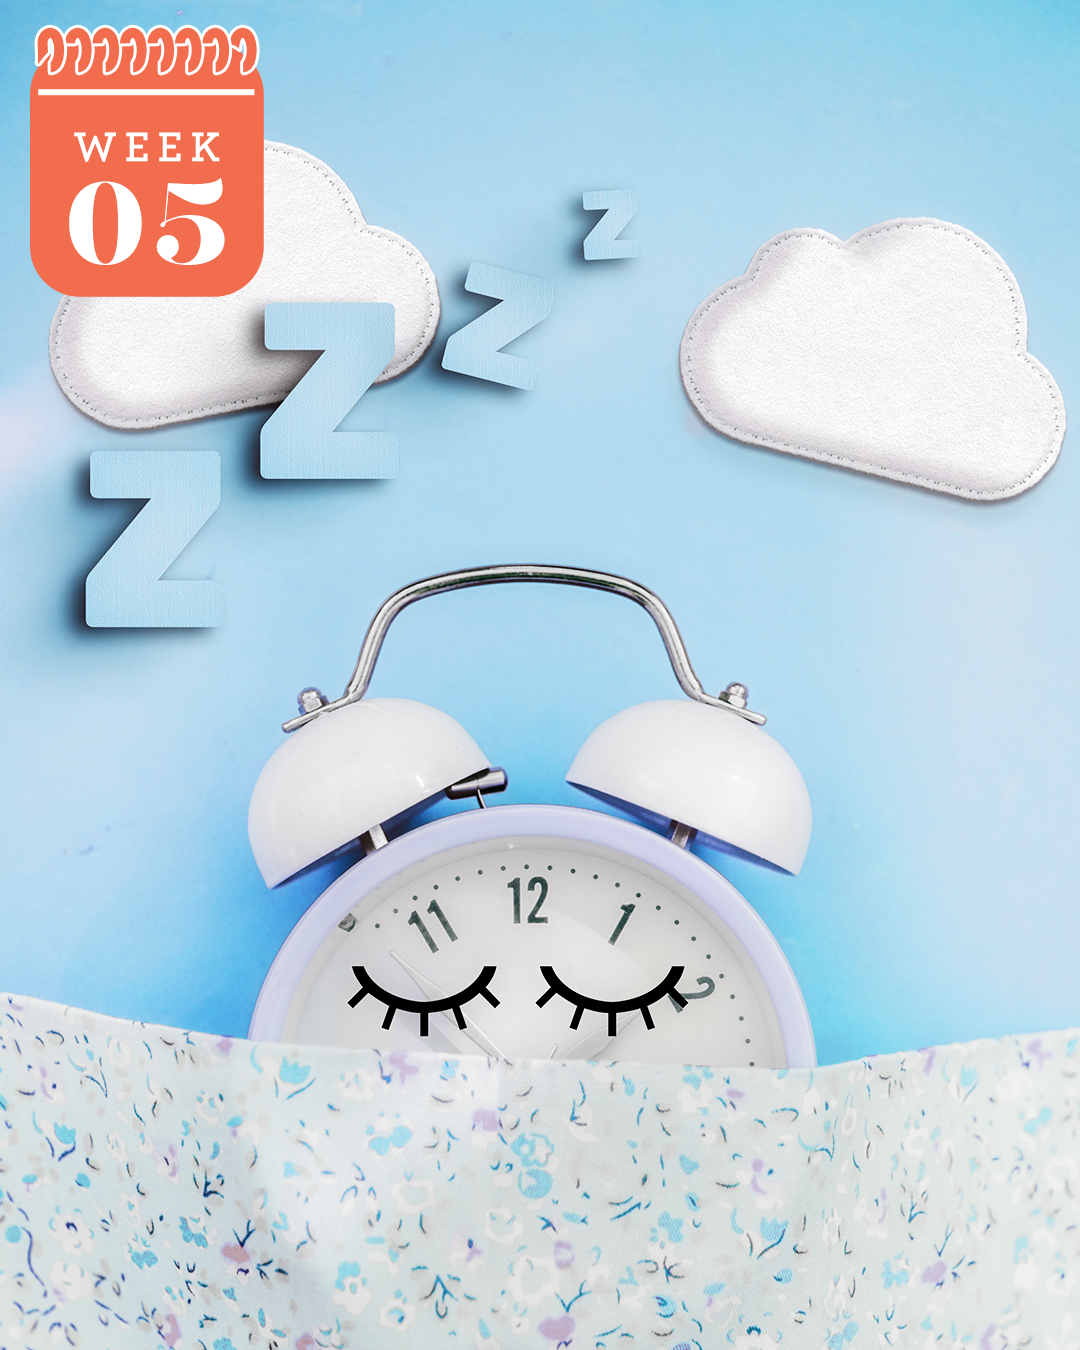 Alarm clock with closed eyes drawn under the bed sheet